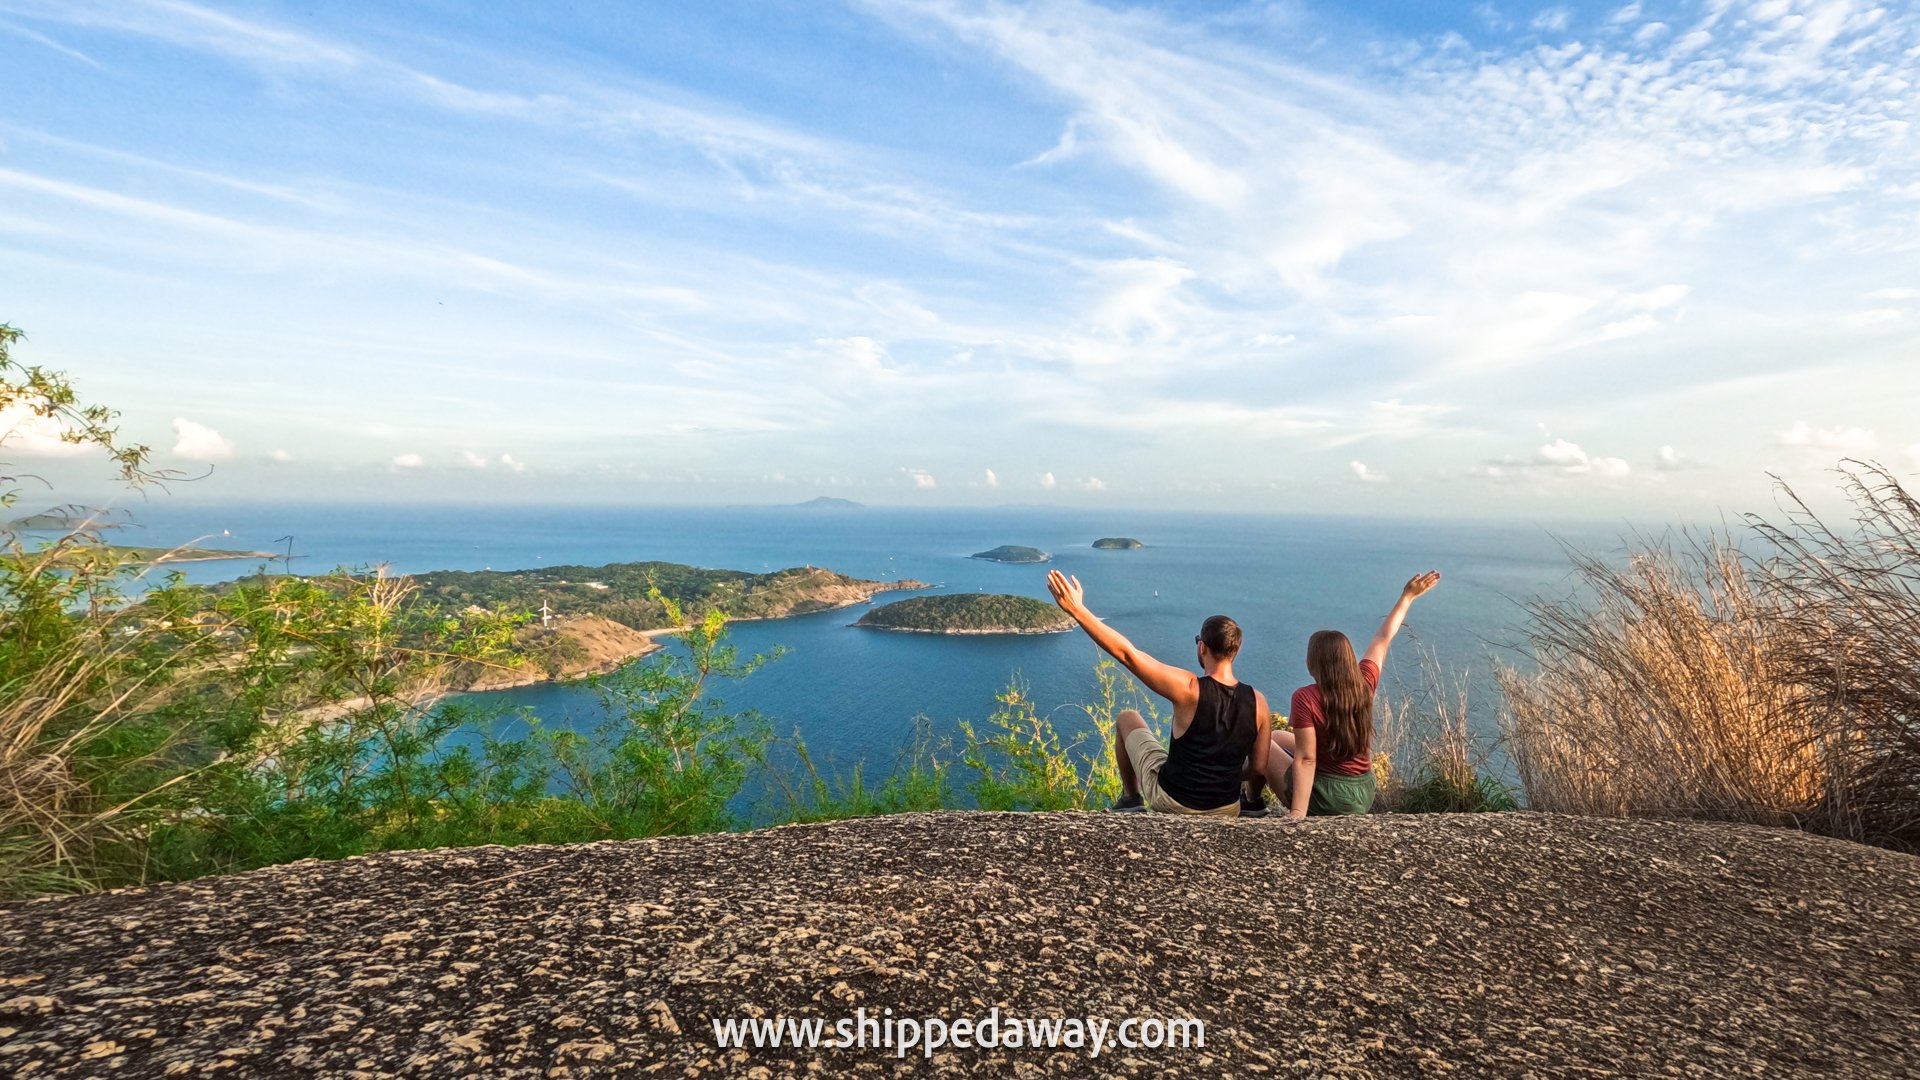 Best viewpoint in Phuket, Thailand - black rock viewpoint